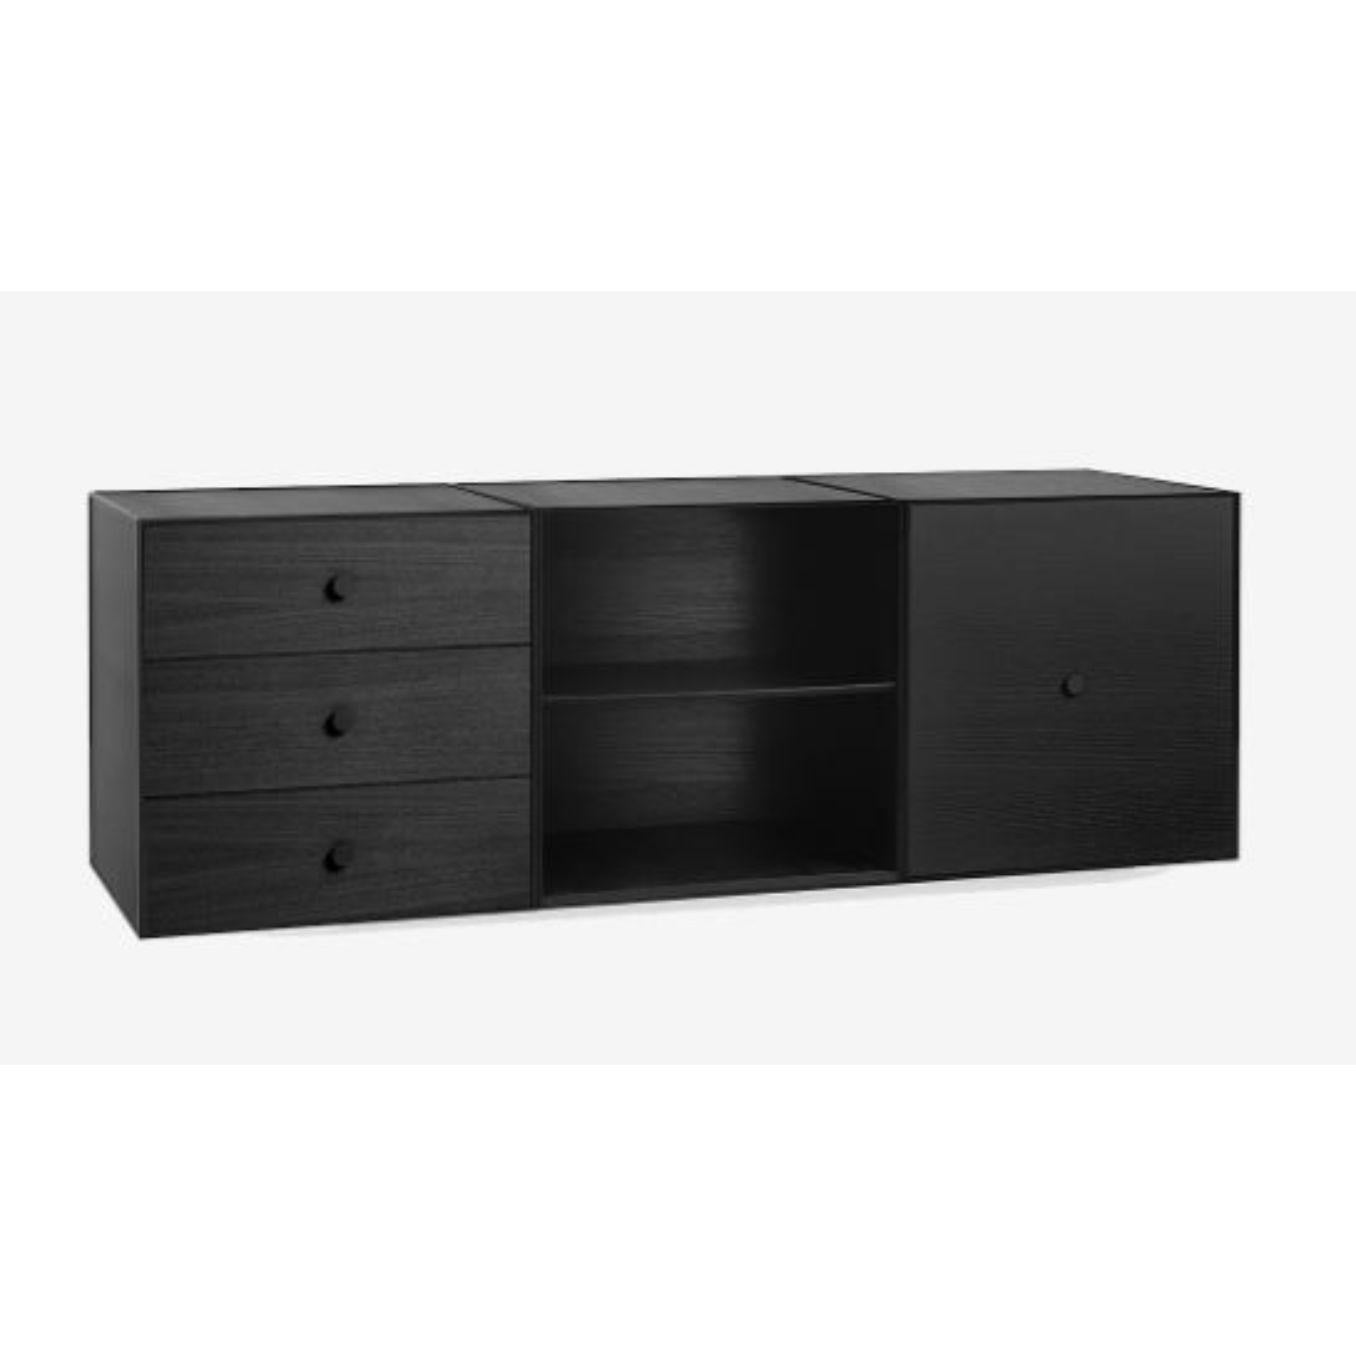 49 black ash frame box trio by Lassen
Dimensions: D 147 x W 42 x H 49 cm 
Materials: Finér, Melamin, Melamine, Metal, Veneer, Ash
Also available in different colours and dimensions.
Weight: 45 Kg

By Lassen is a Danish design brand focused on